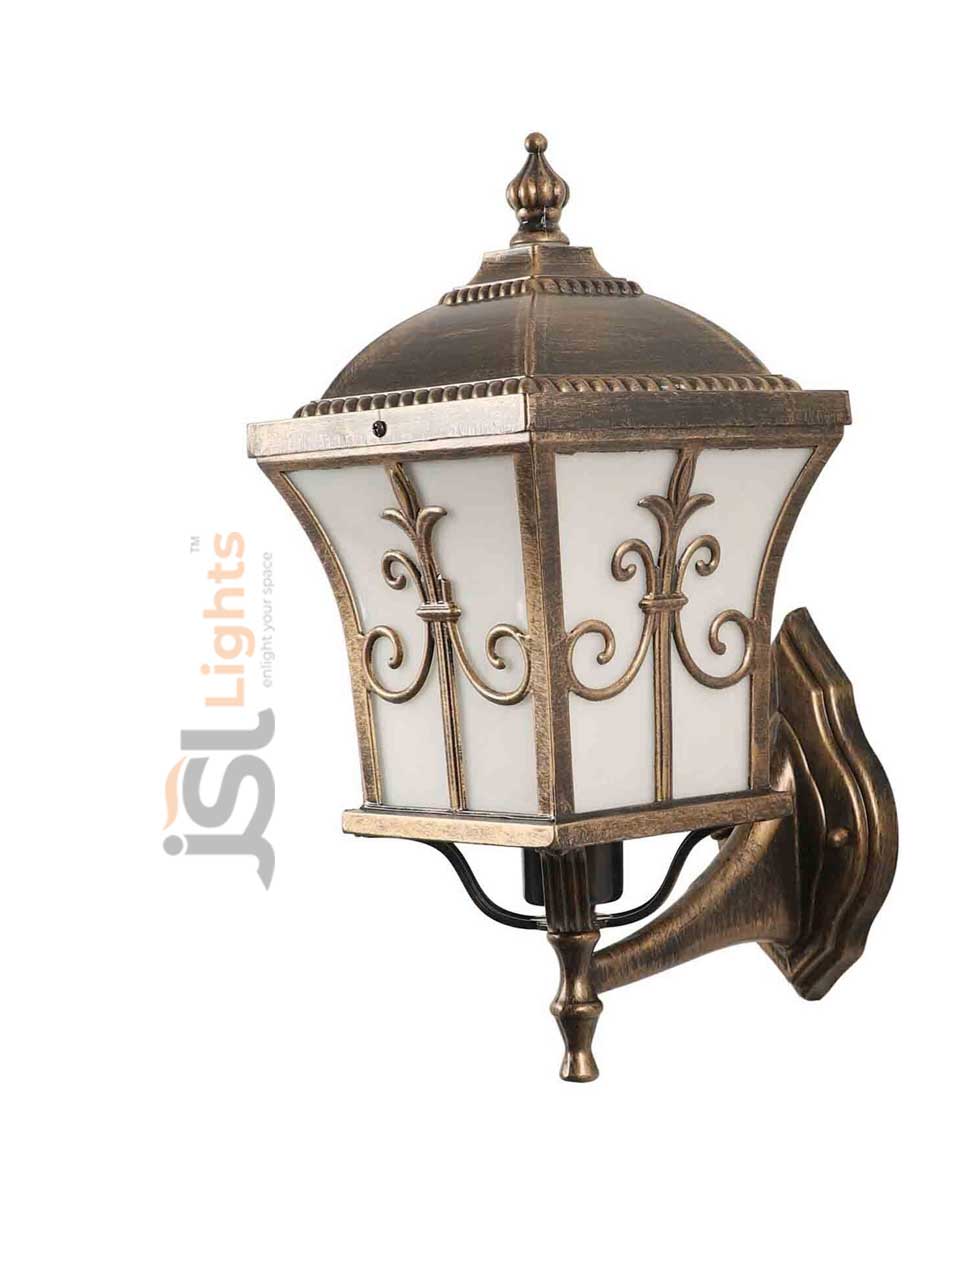 12W Express Wall Decorative Light Antique Body High Quality Outdoor Wall Lamp 3000K IP54 OFF Mode